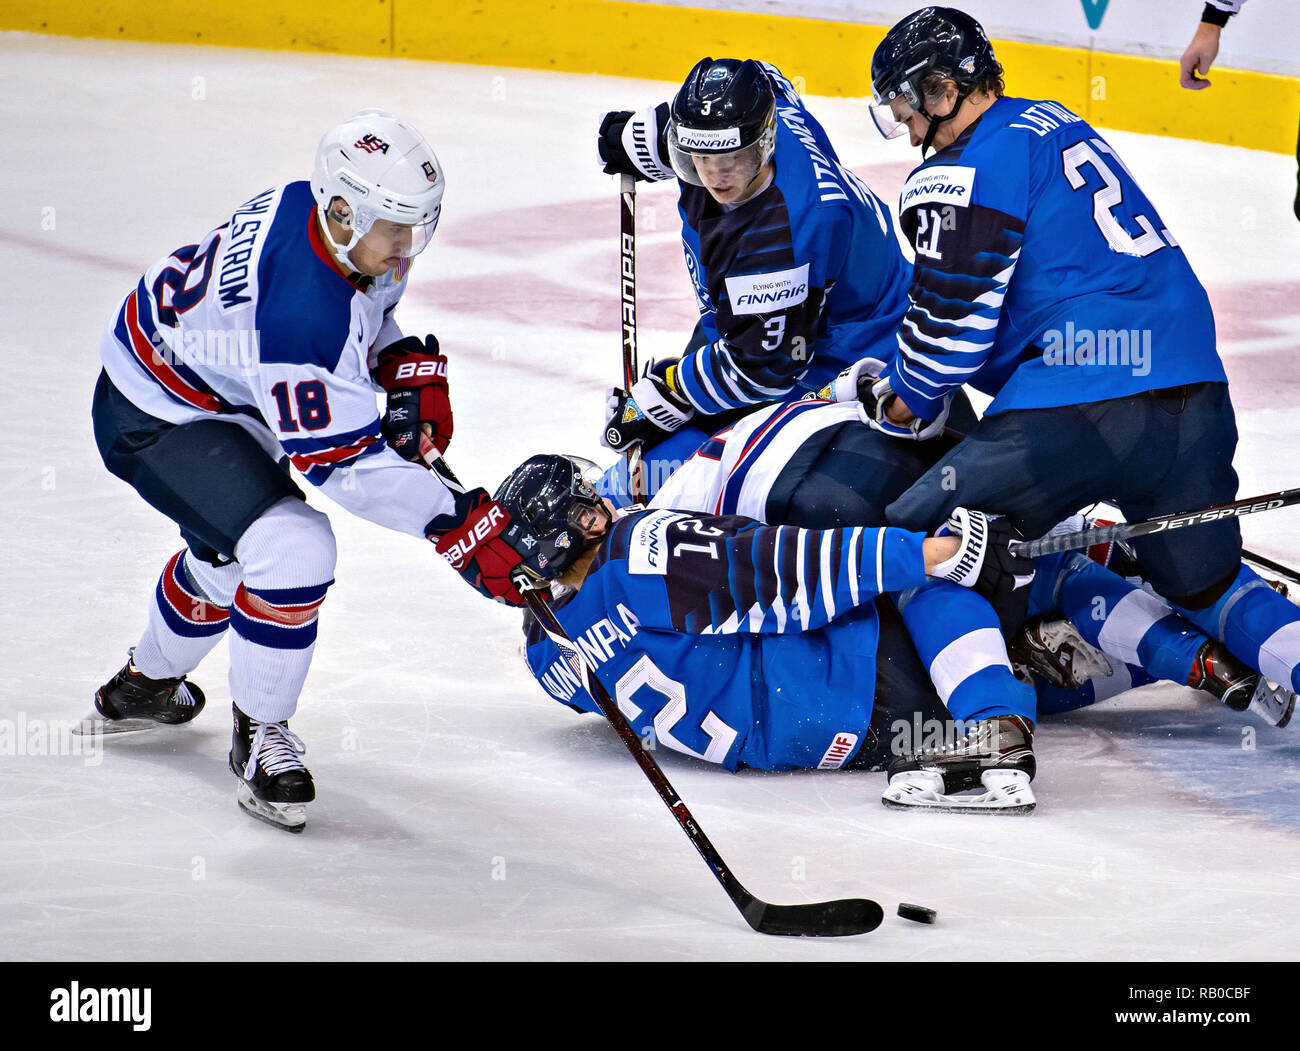 Vancouver. 6th Jan, 2019. Team USA's Oliver Wahlstrom (L) competes during a match against Finland at the IIHF World Junior Championships in Vancouver, Canada, January, 5, 2019. Credit: Andrew Soong/Xinhua/Alamy Live News Stock Photo